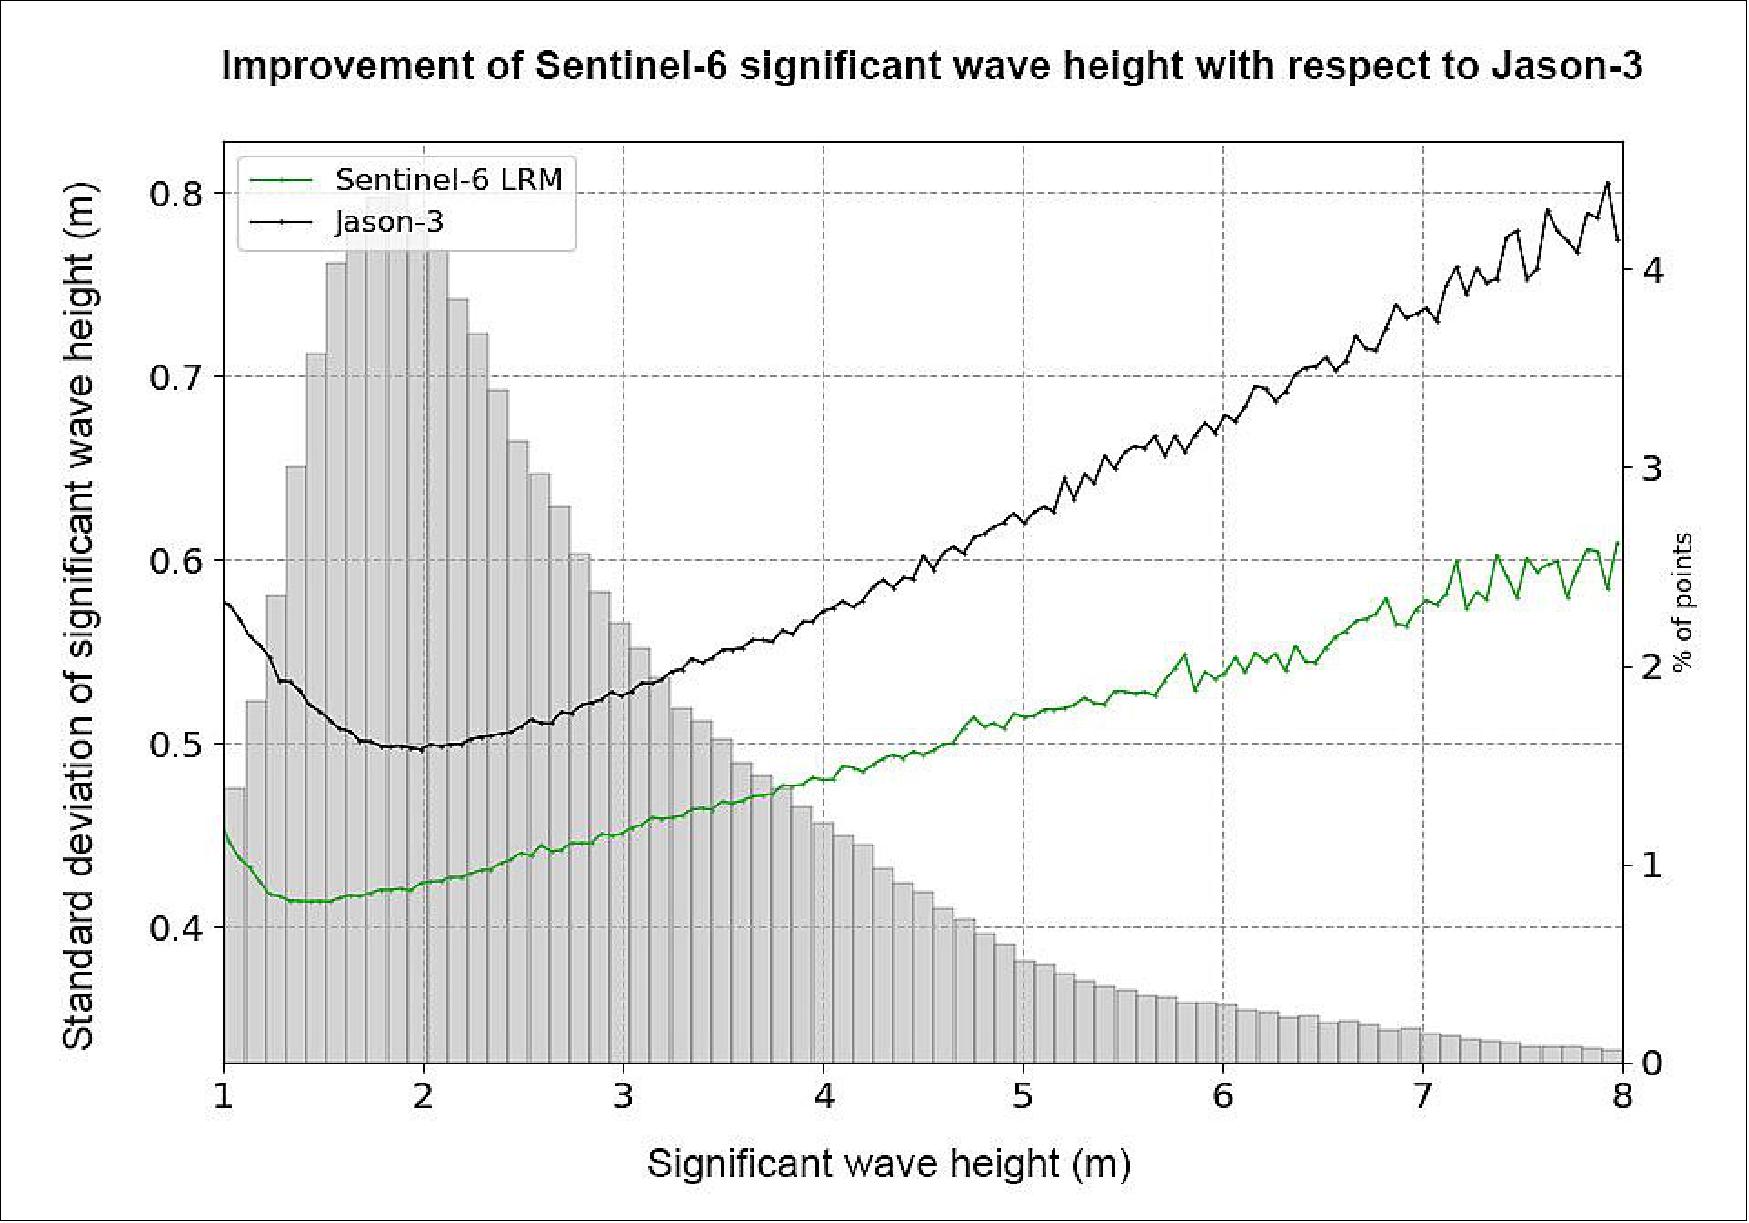 Figure 21: Improvement of Sentinel-6 significant wave height with respect to Jason-3 (image credit: CLS)